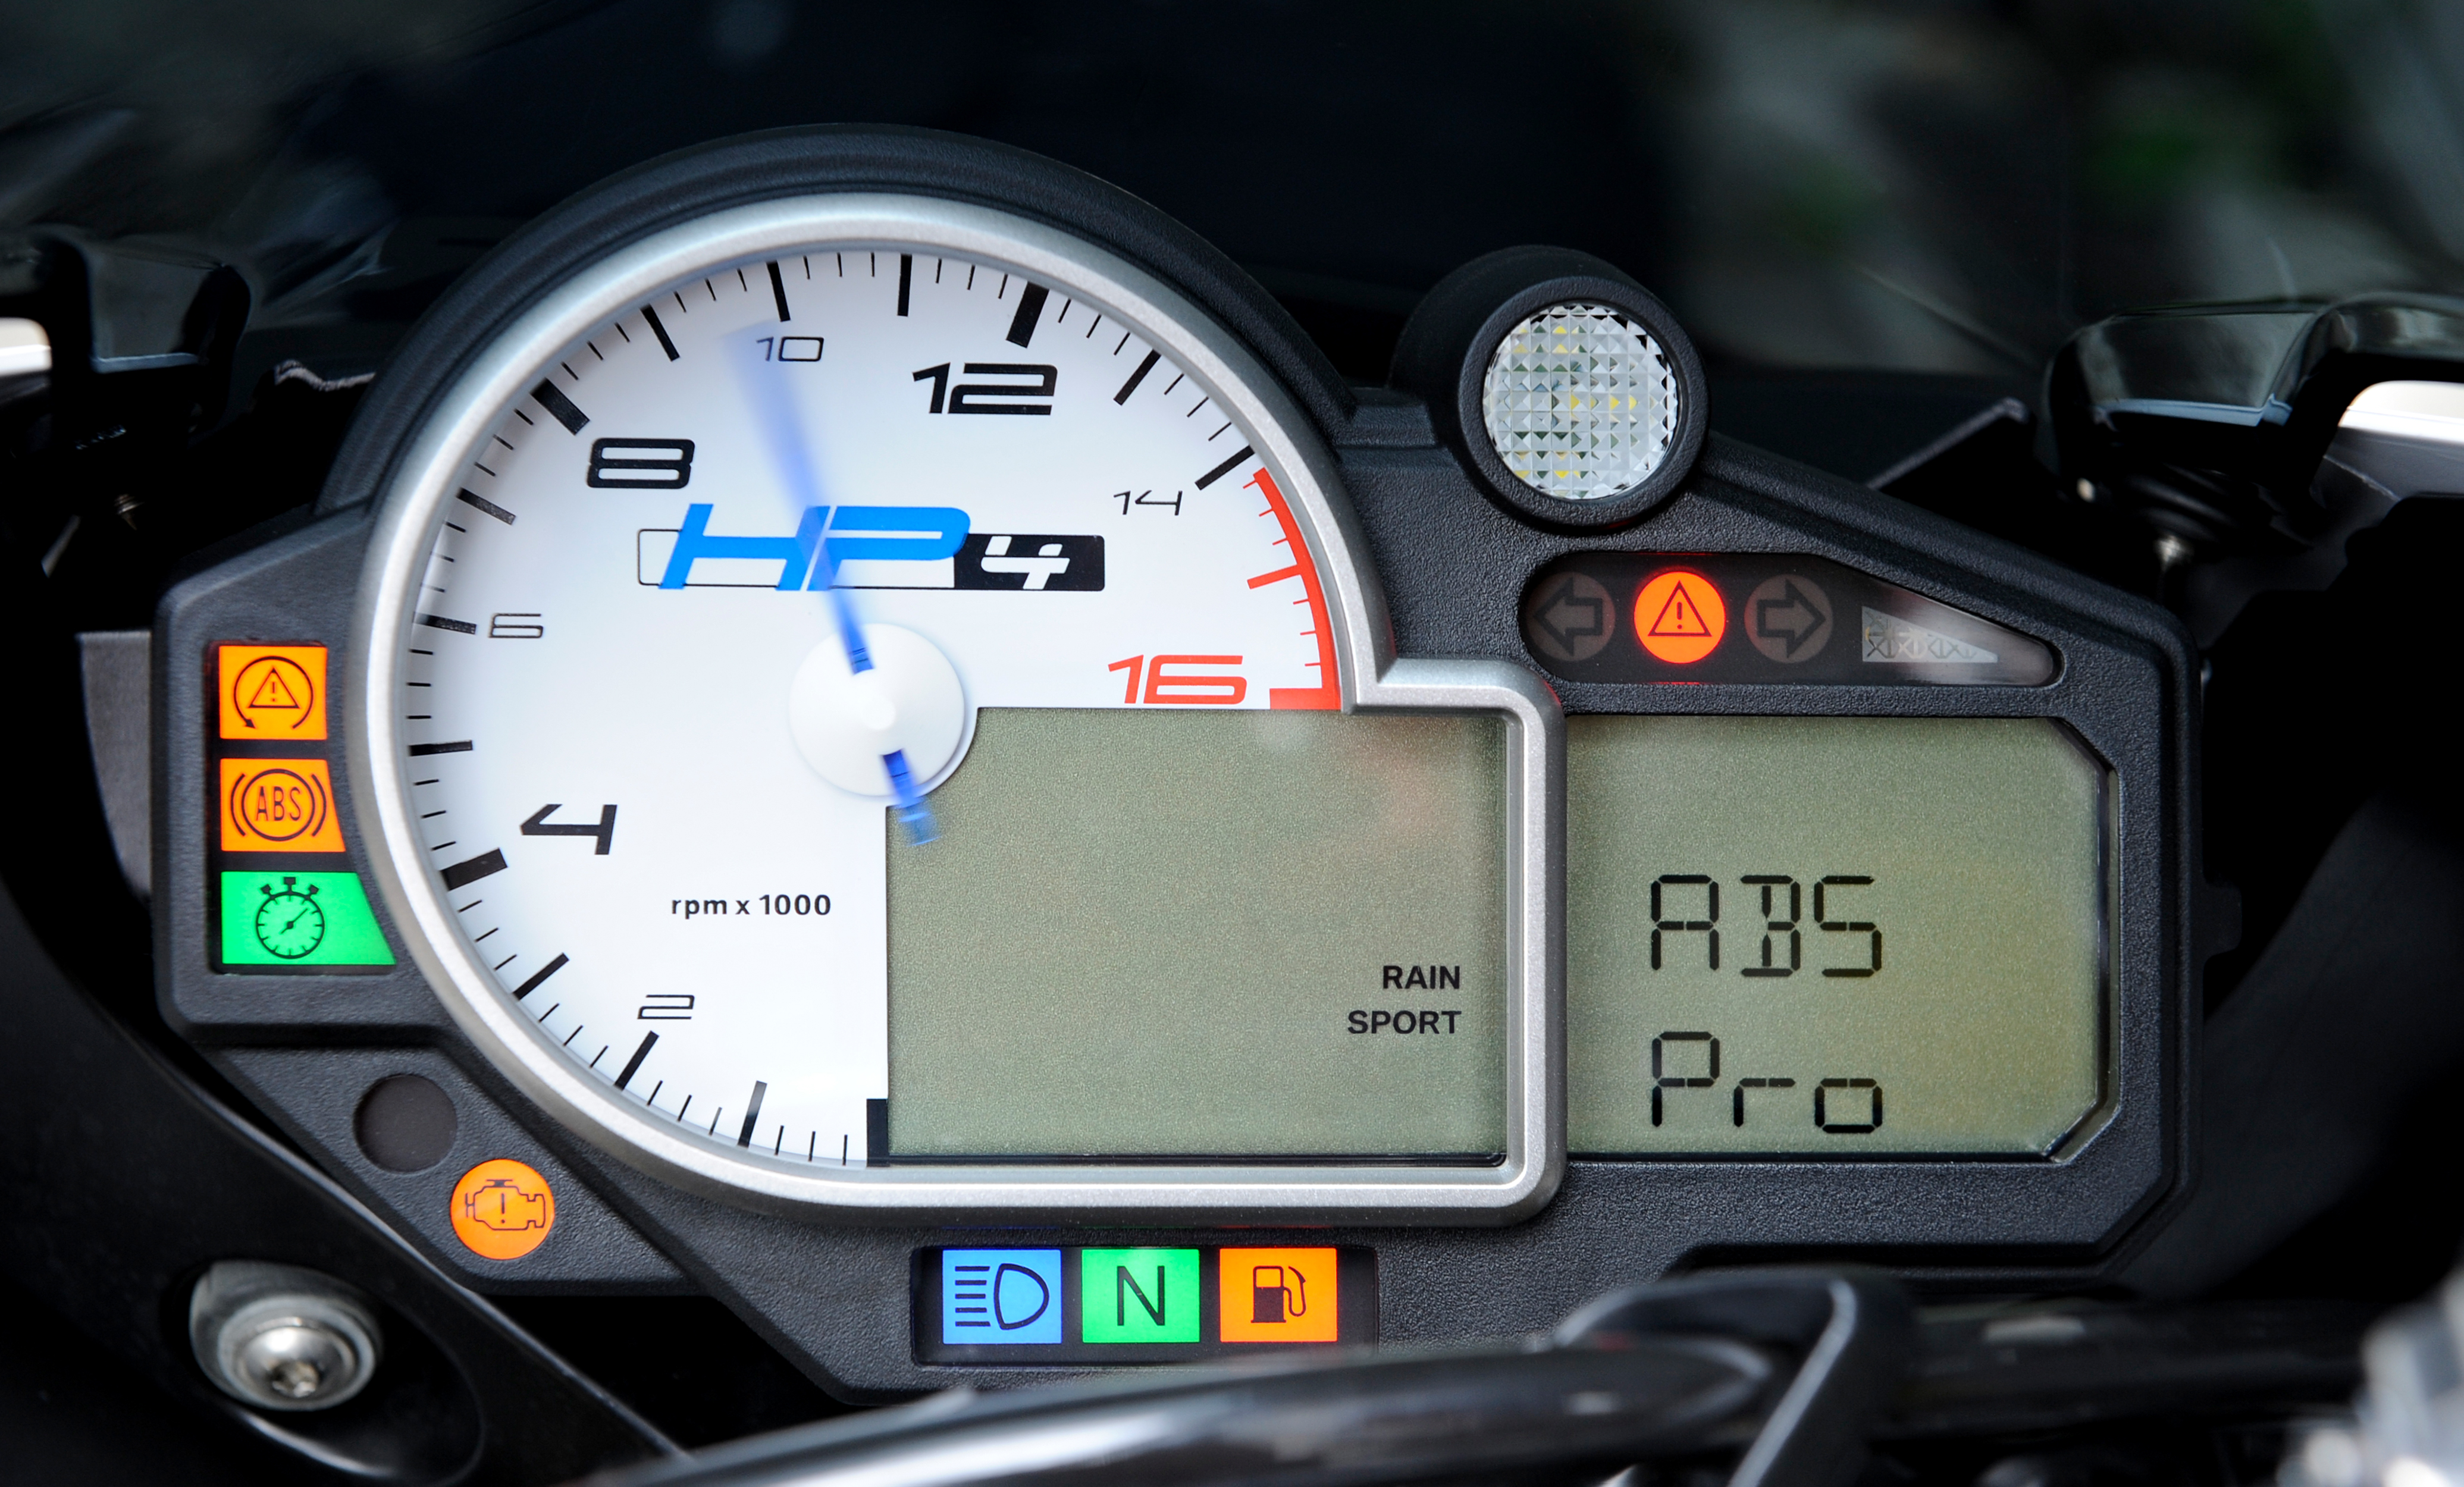 BMW offers retro-fit cornering ABS for HP4